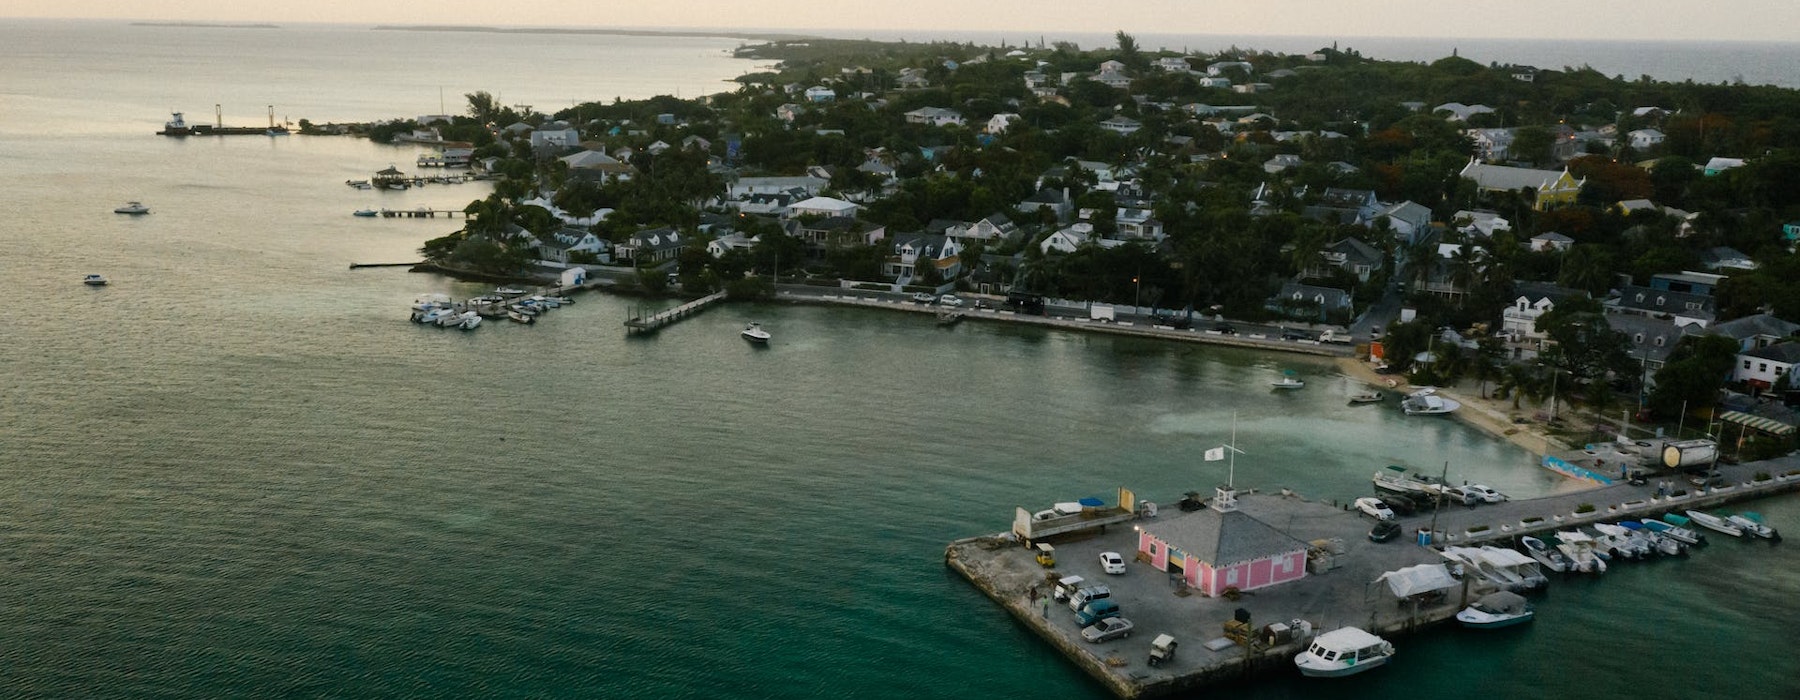 Your Bahamas yacht charter starts with Moran